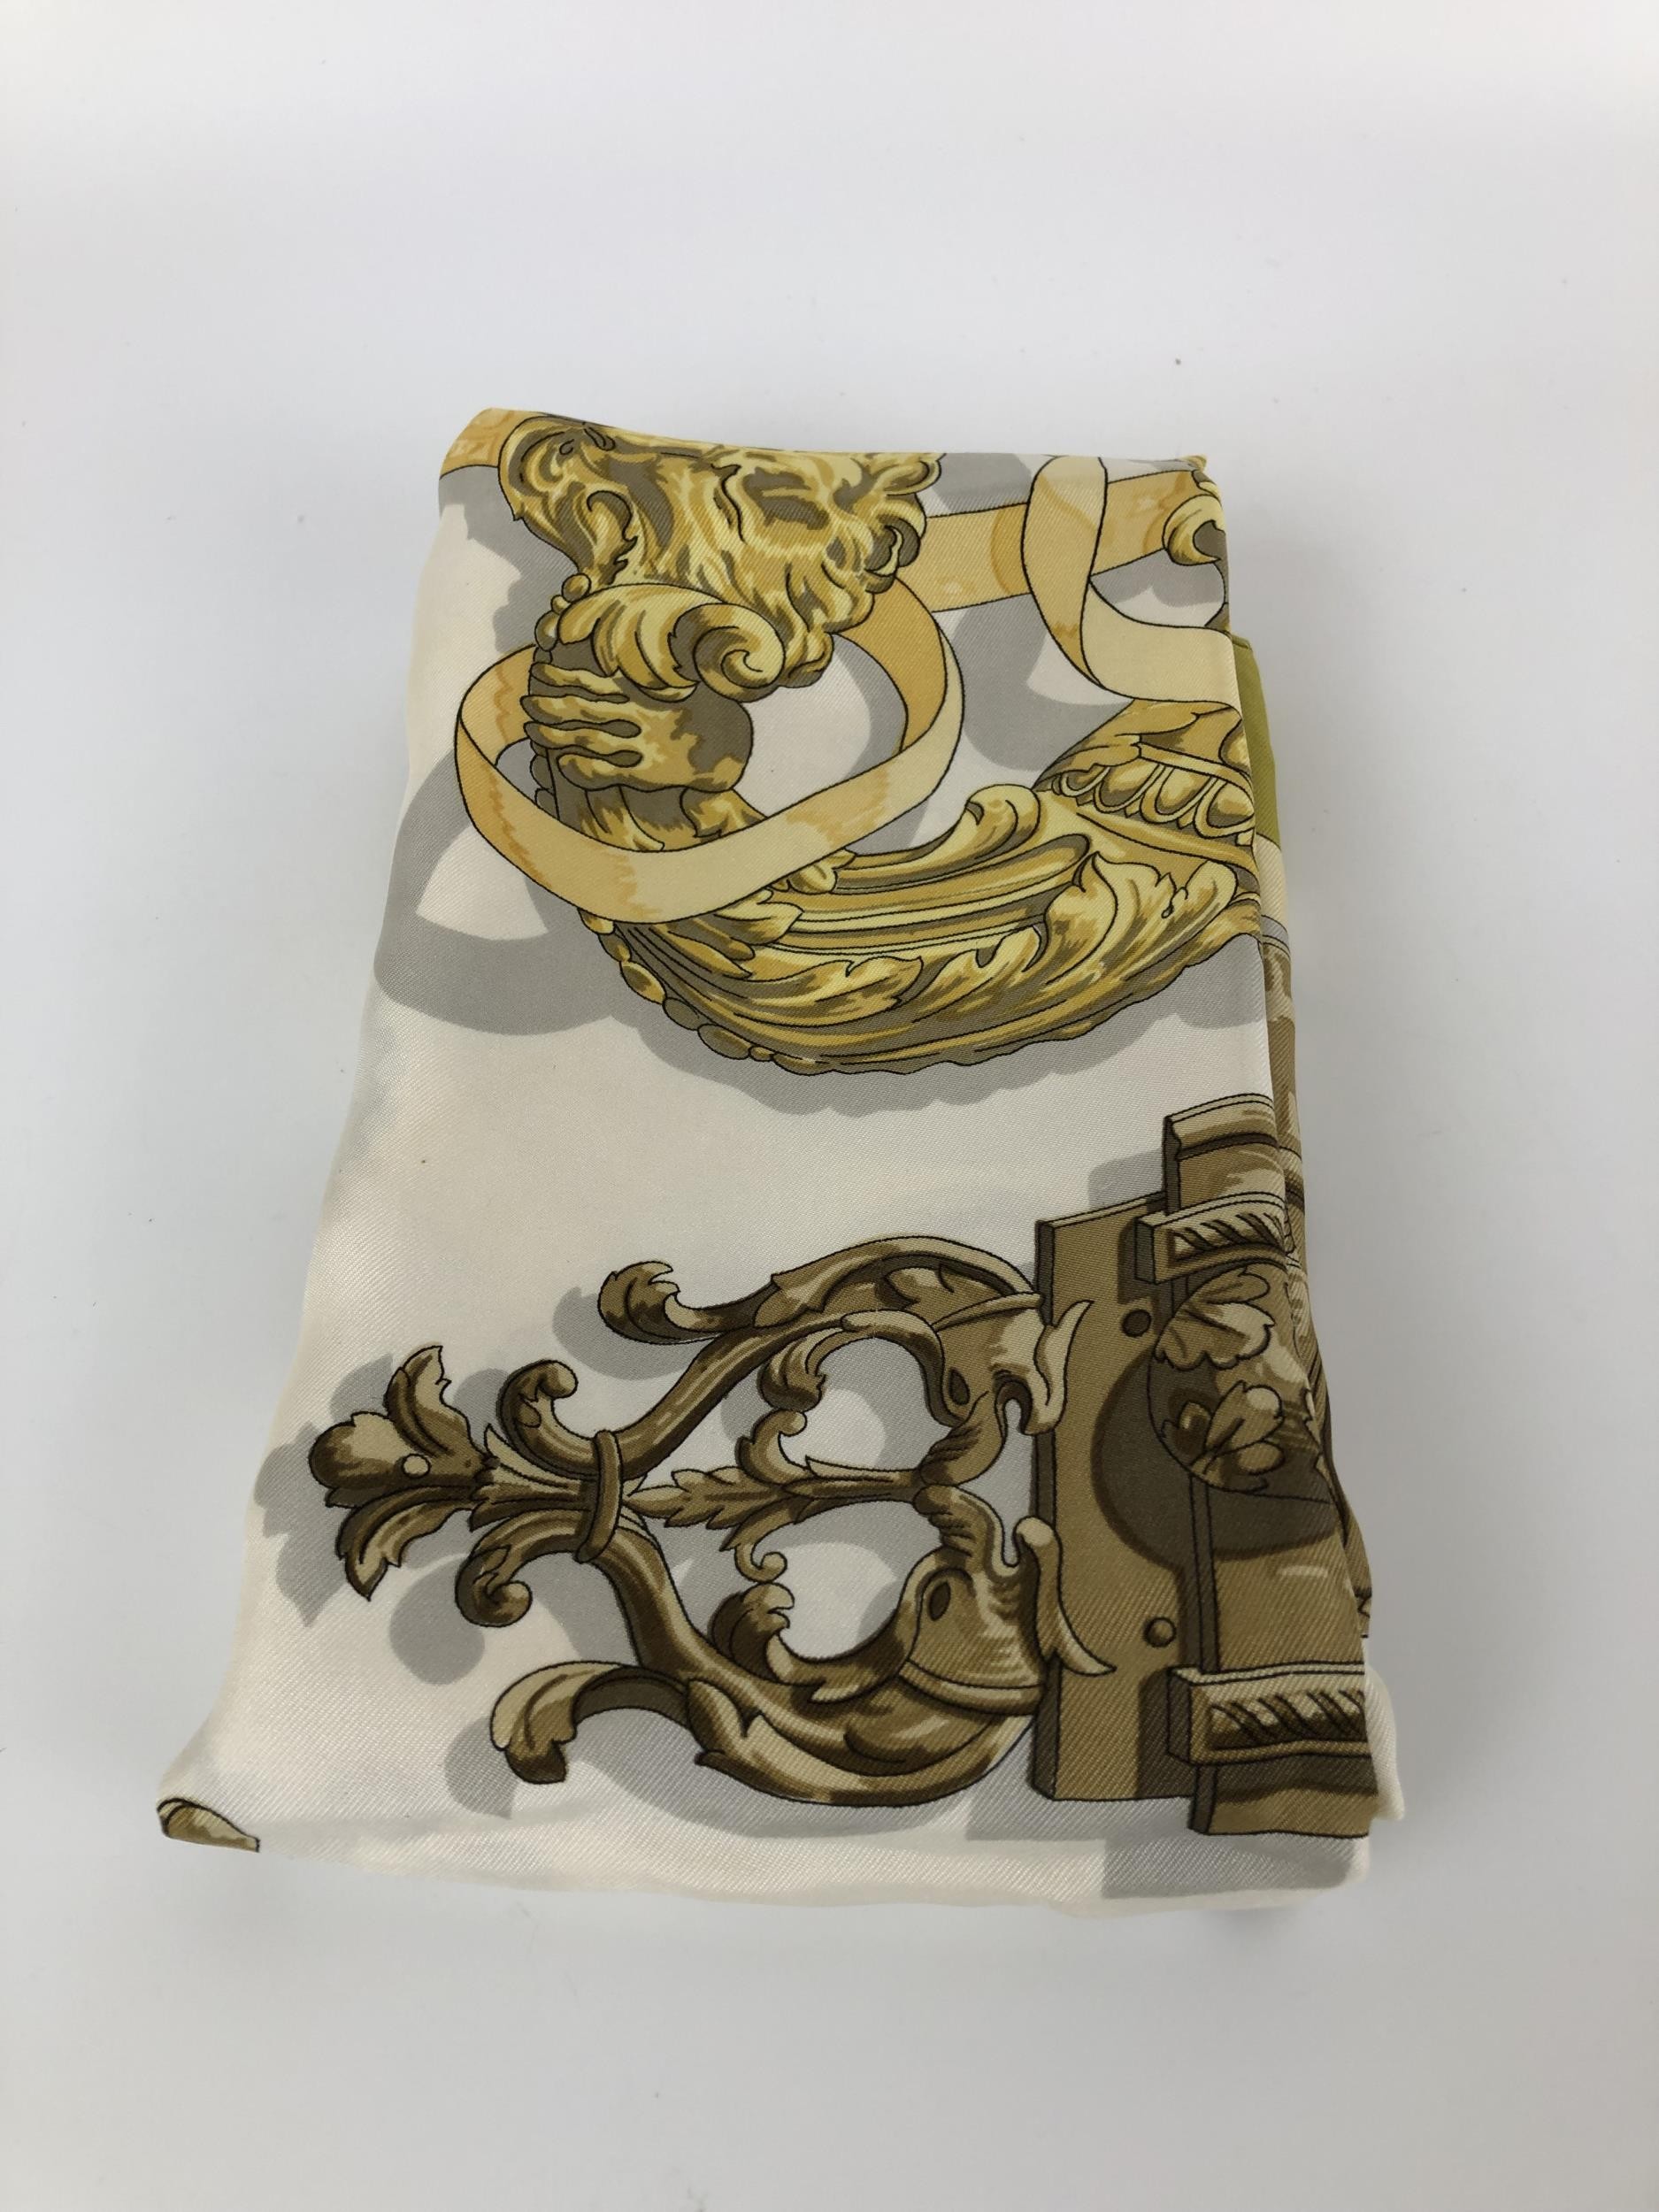 A Hermes scarf - Image 4 of 4